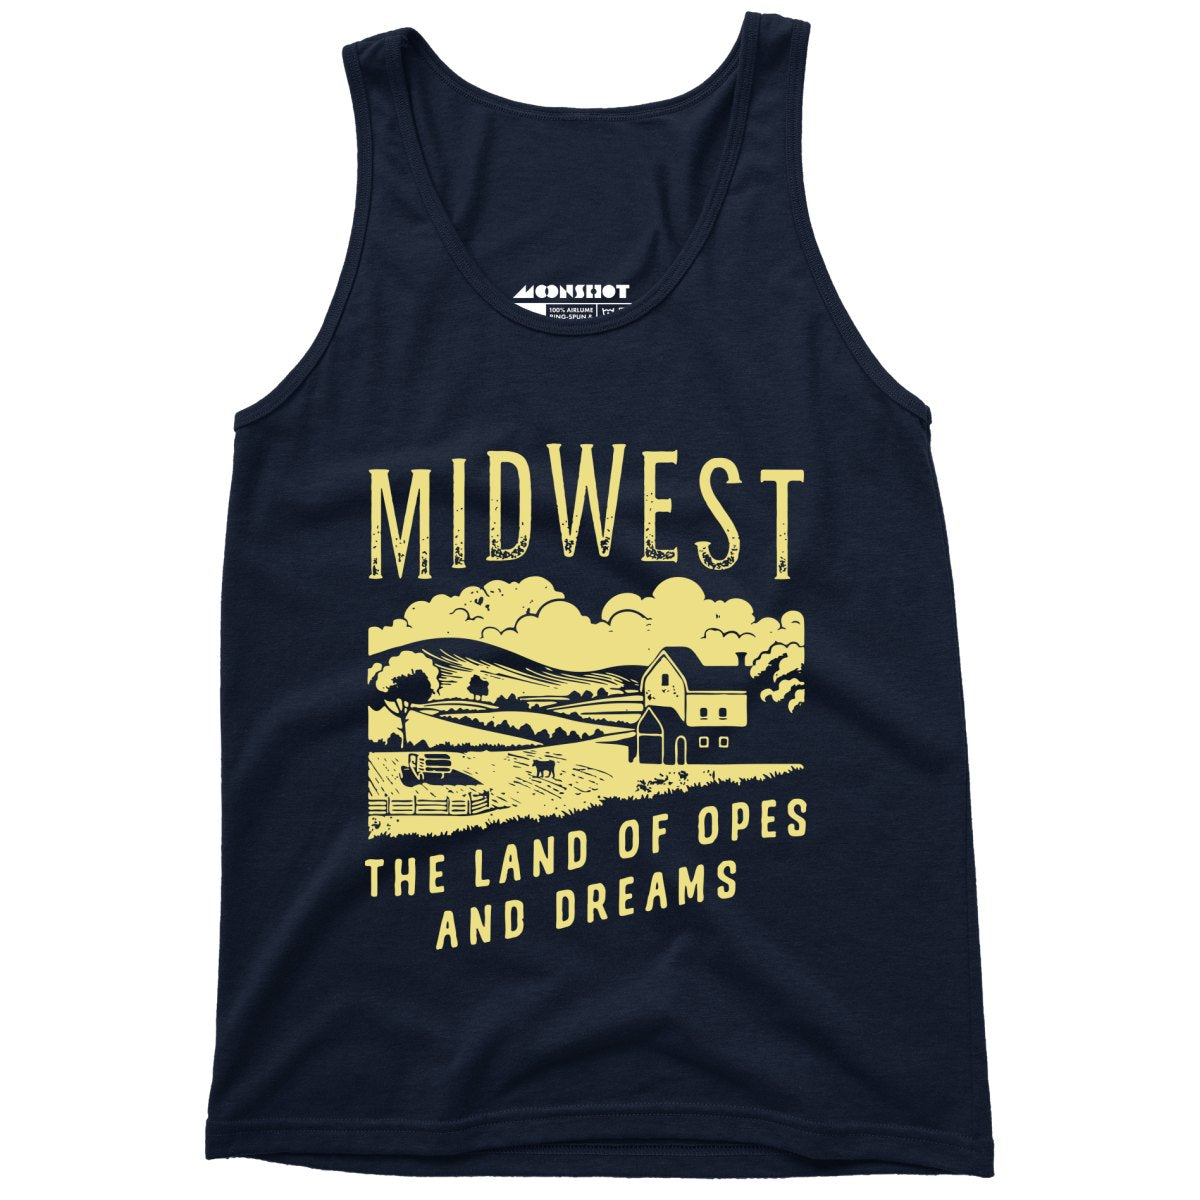 Midwest The Land of Opes and Dreams - Unisex Tank Top